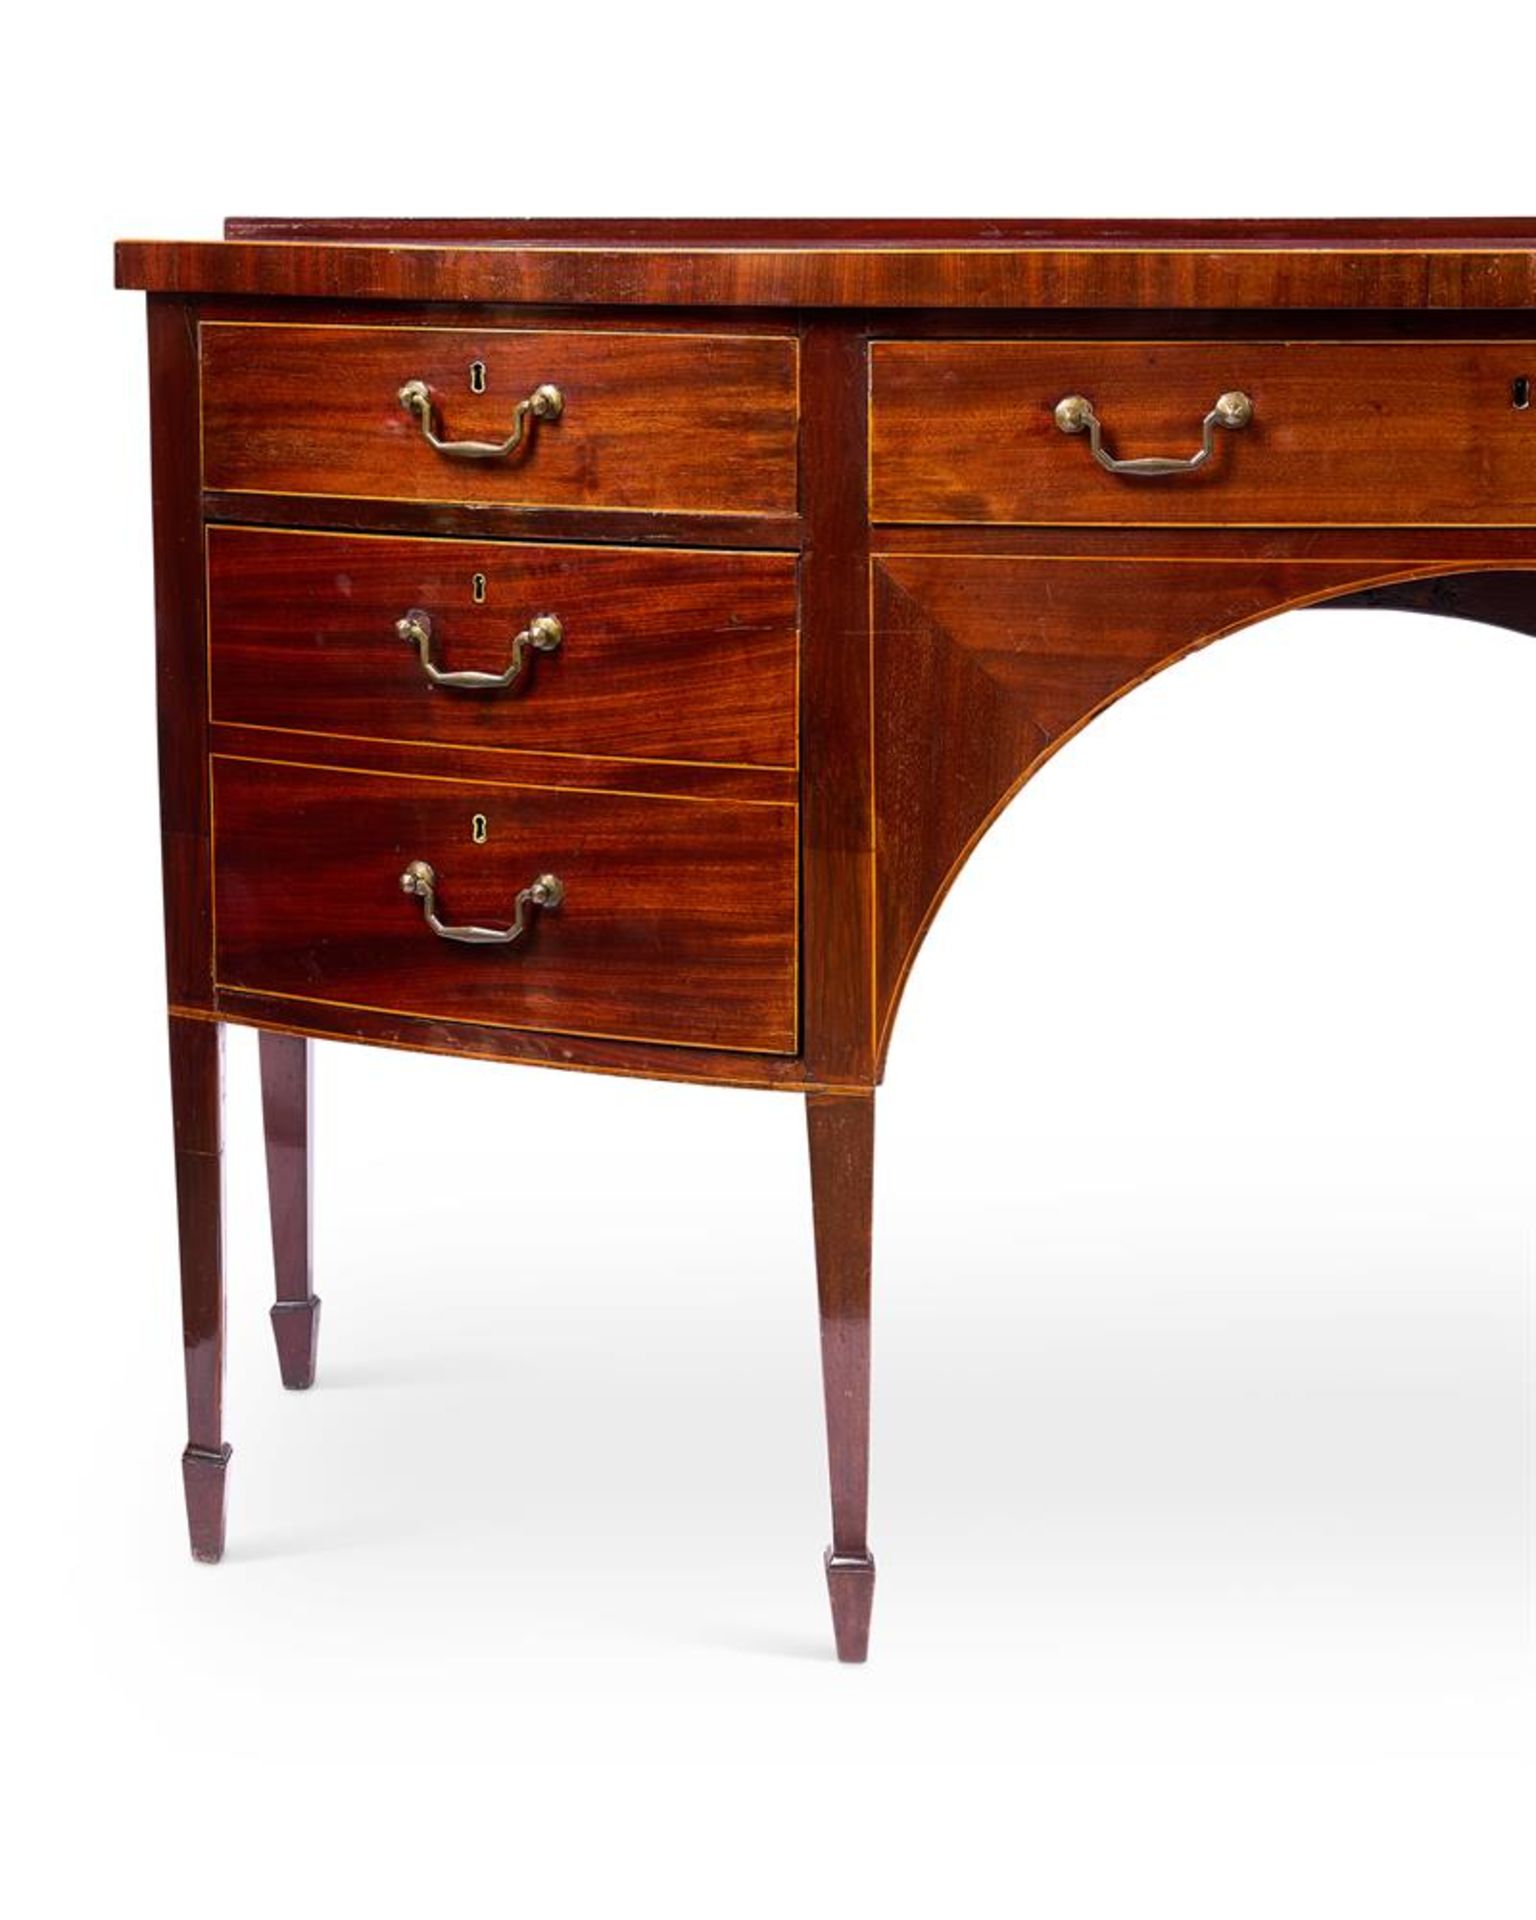 A GEORGE III MAHOGANY BOWFRONT SIDEBOARD - Image 2 of 3